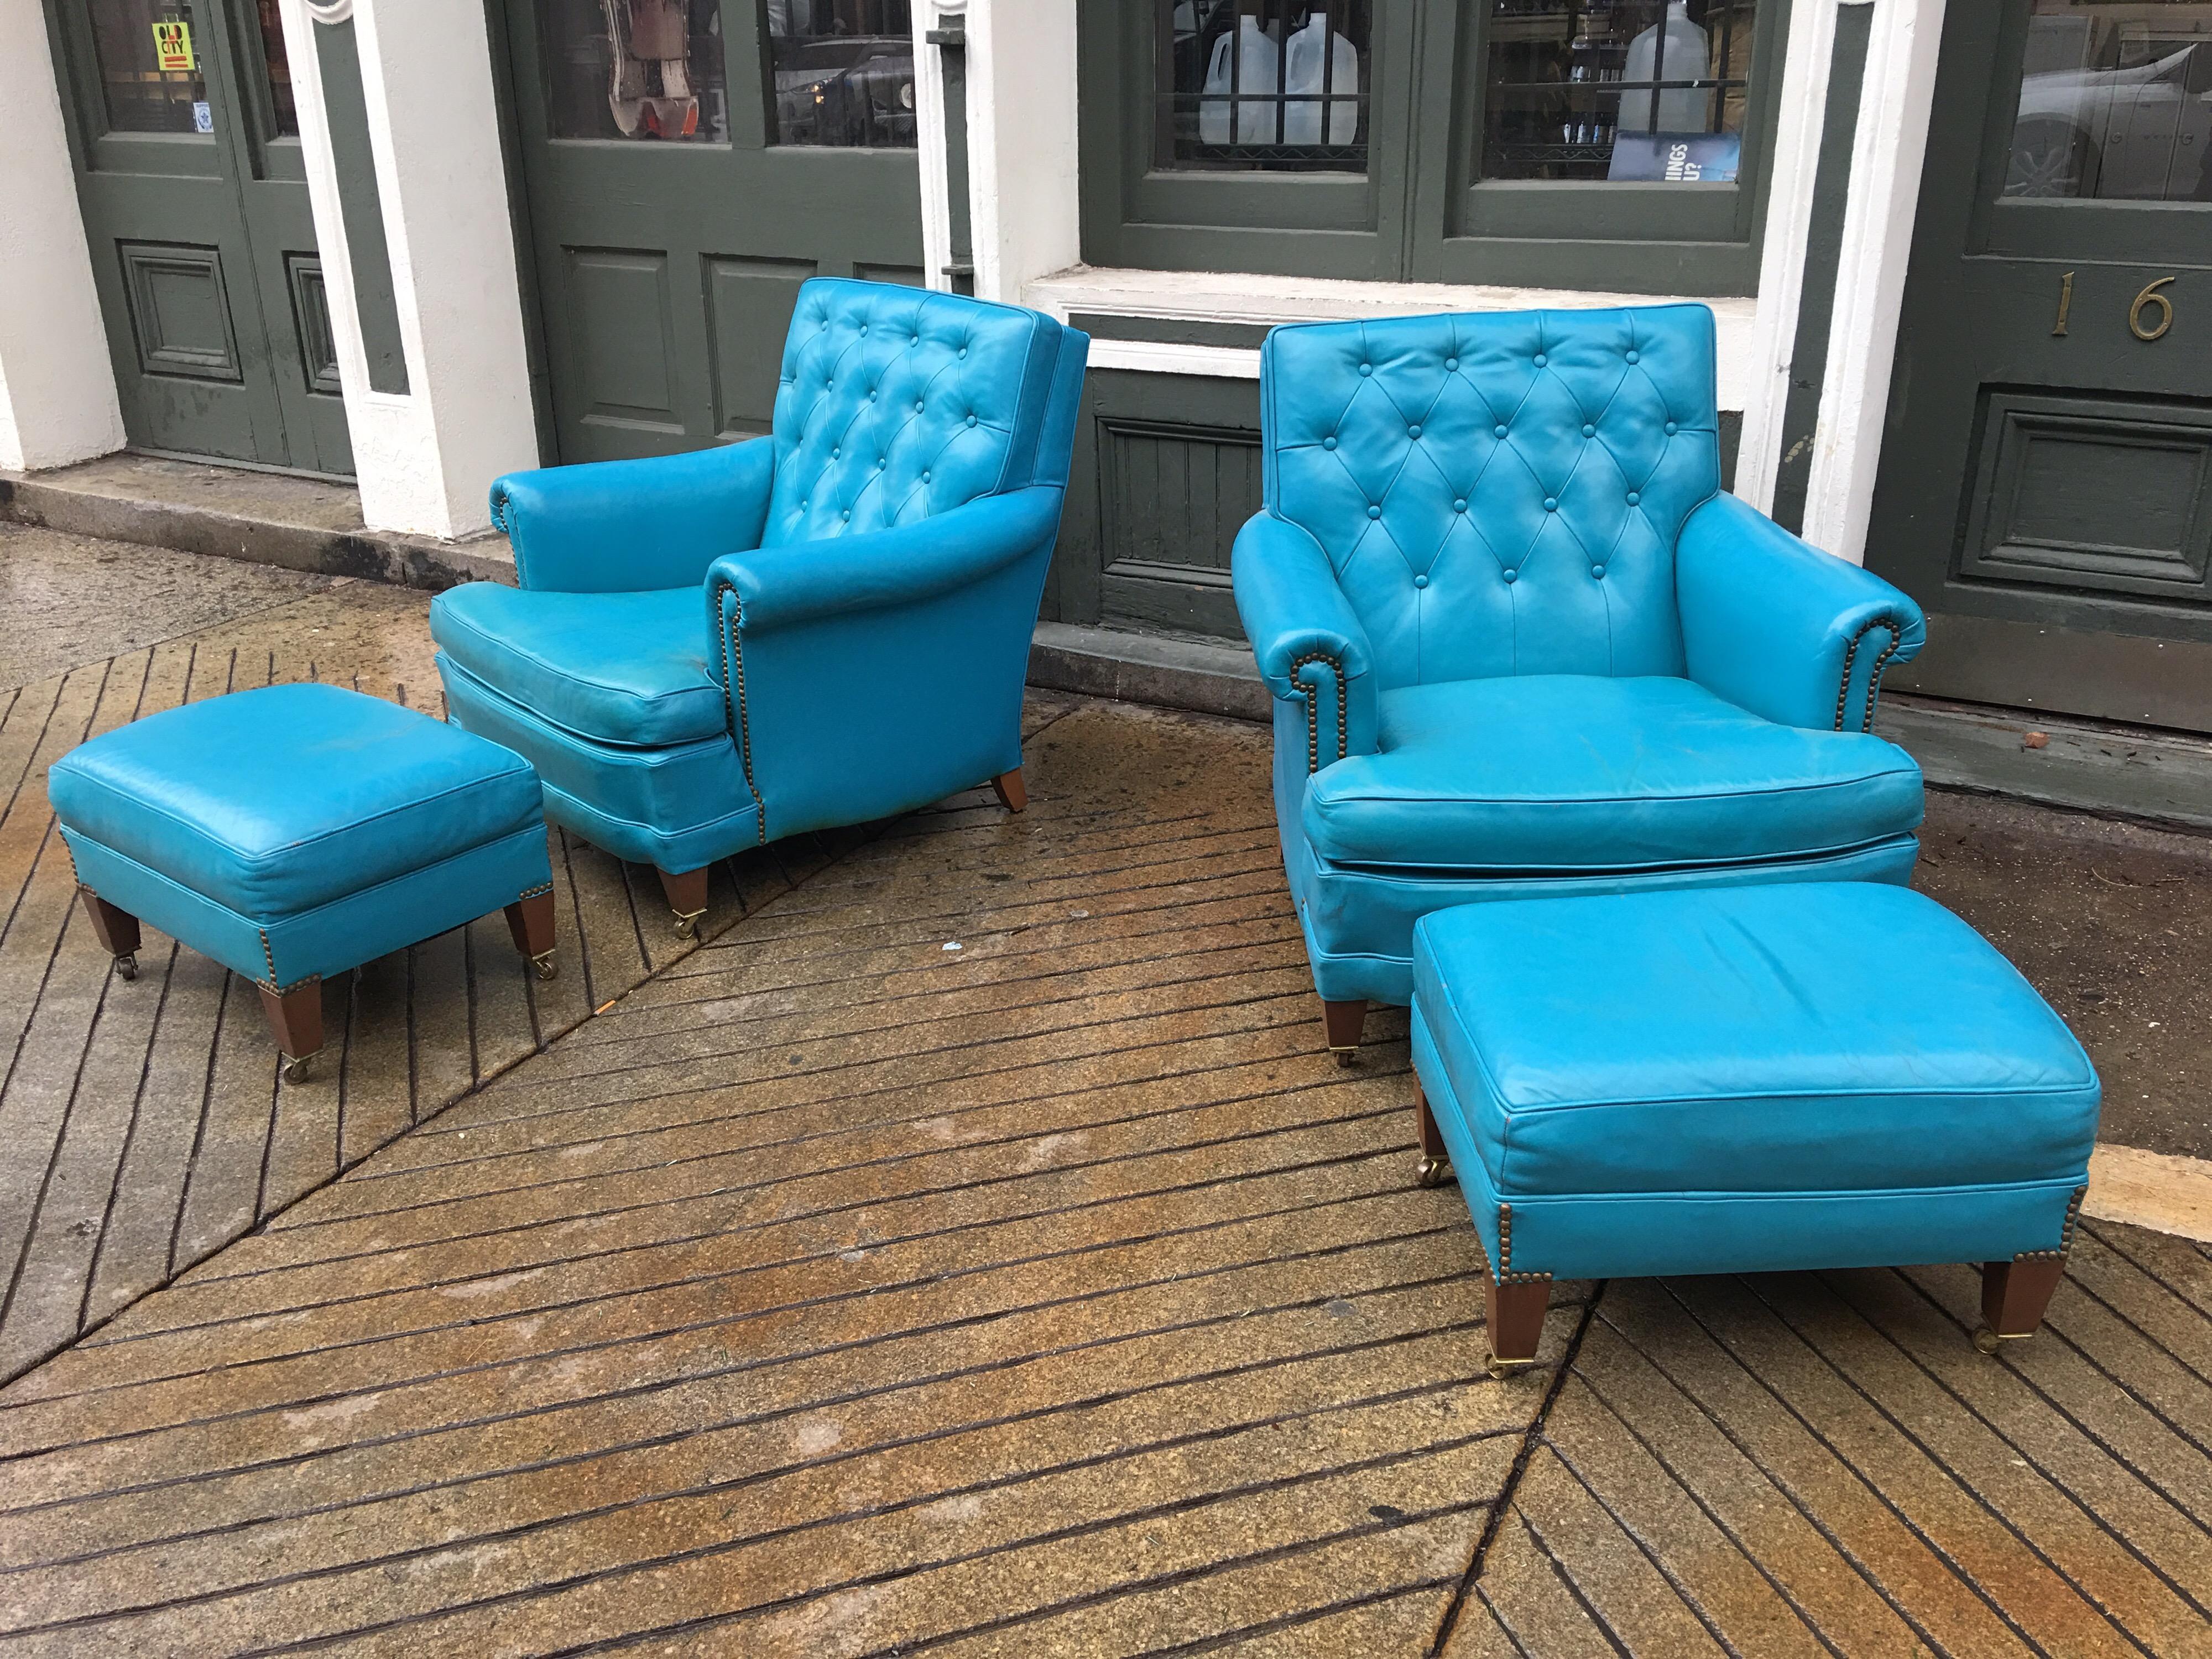 Beautiful aqua blue leather chesterfield club chairs from the early 1960s in amazing original condition! This pair shows minimal wear, with just a little on the seat cushions. Color is vibrant with no fading, beautiful color not often seen. These